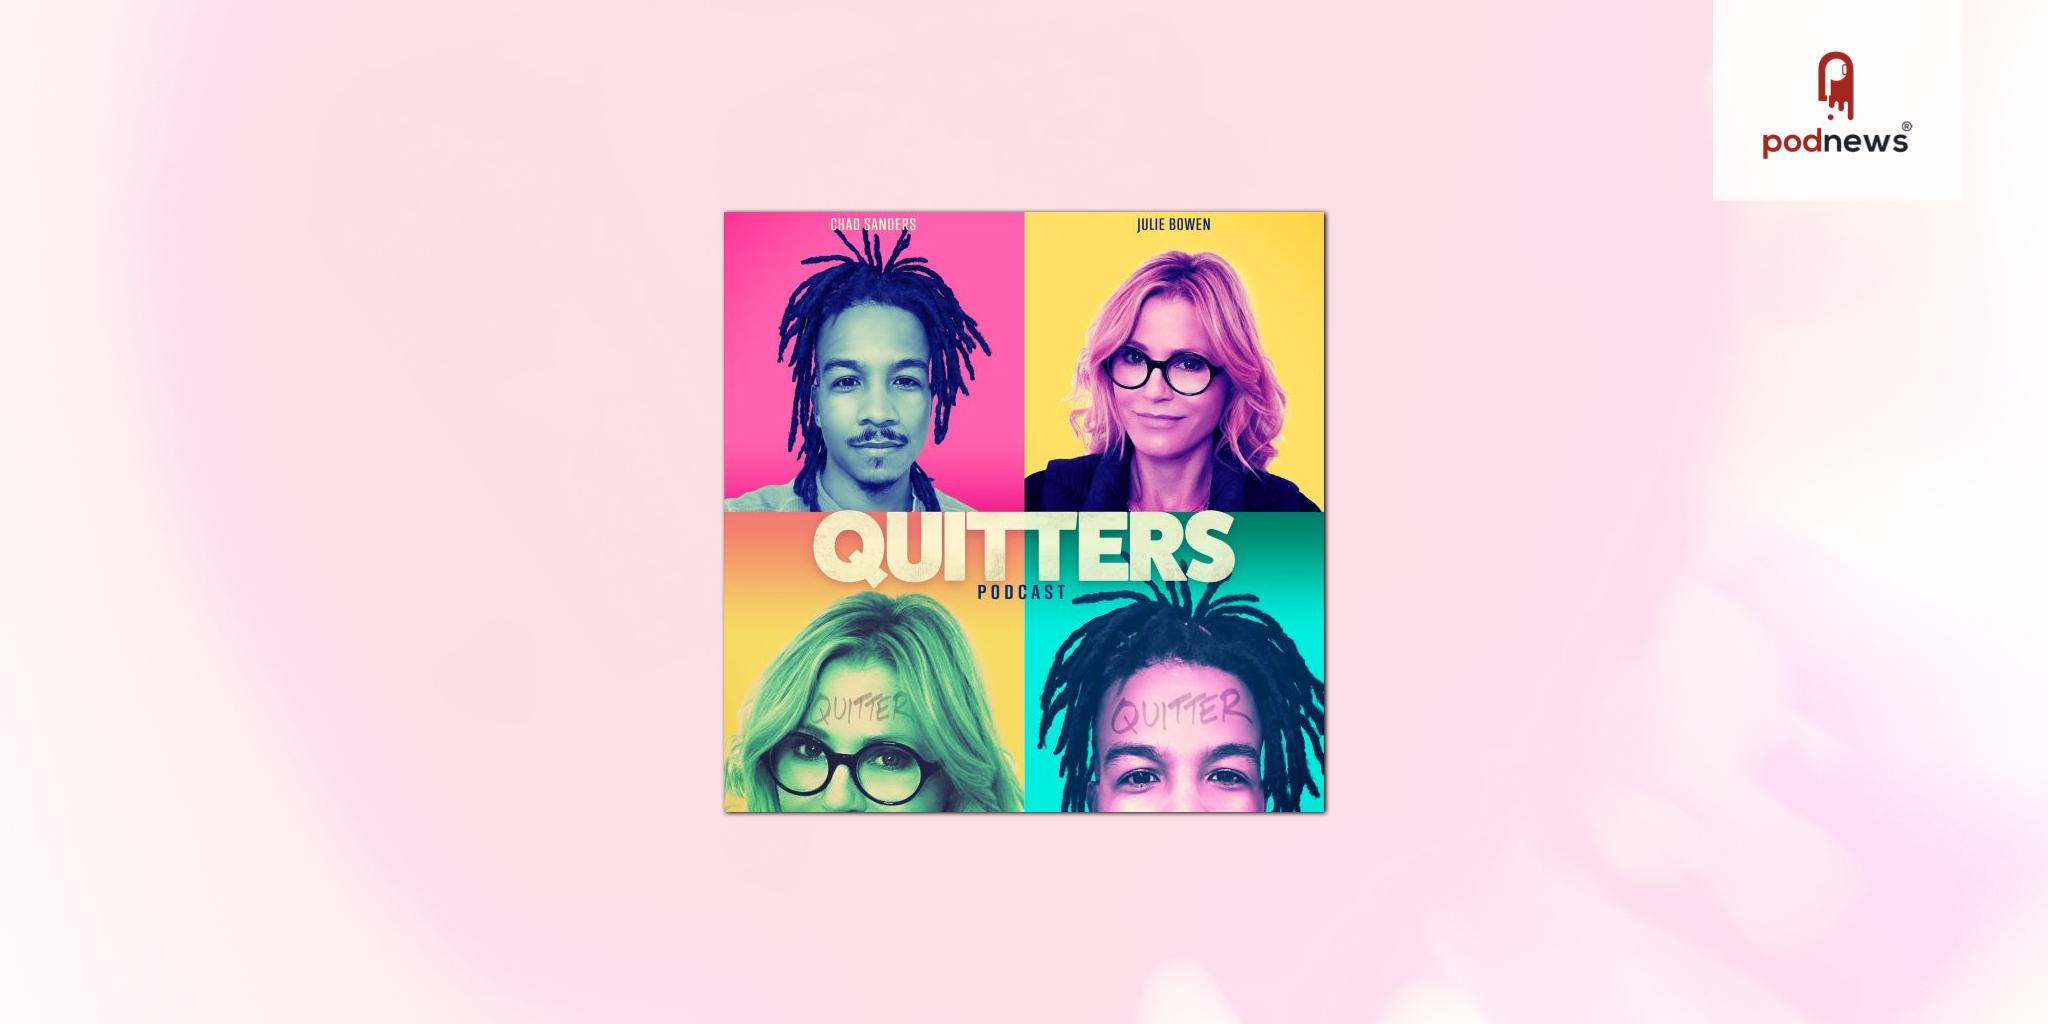 Quitters, a new raw and edgy podcast hosted by Julie Bowen and Chad Sanders, premiers today